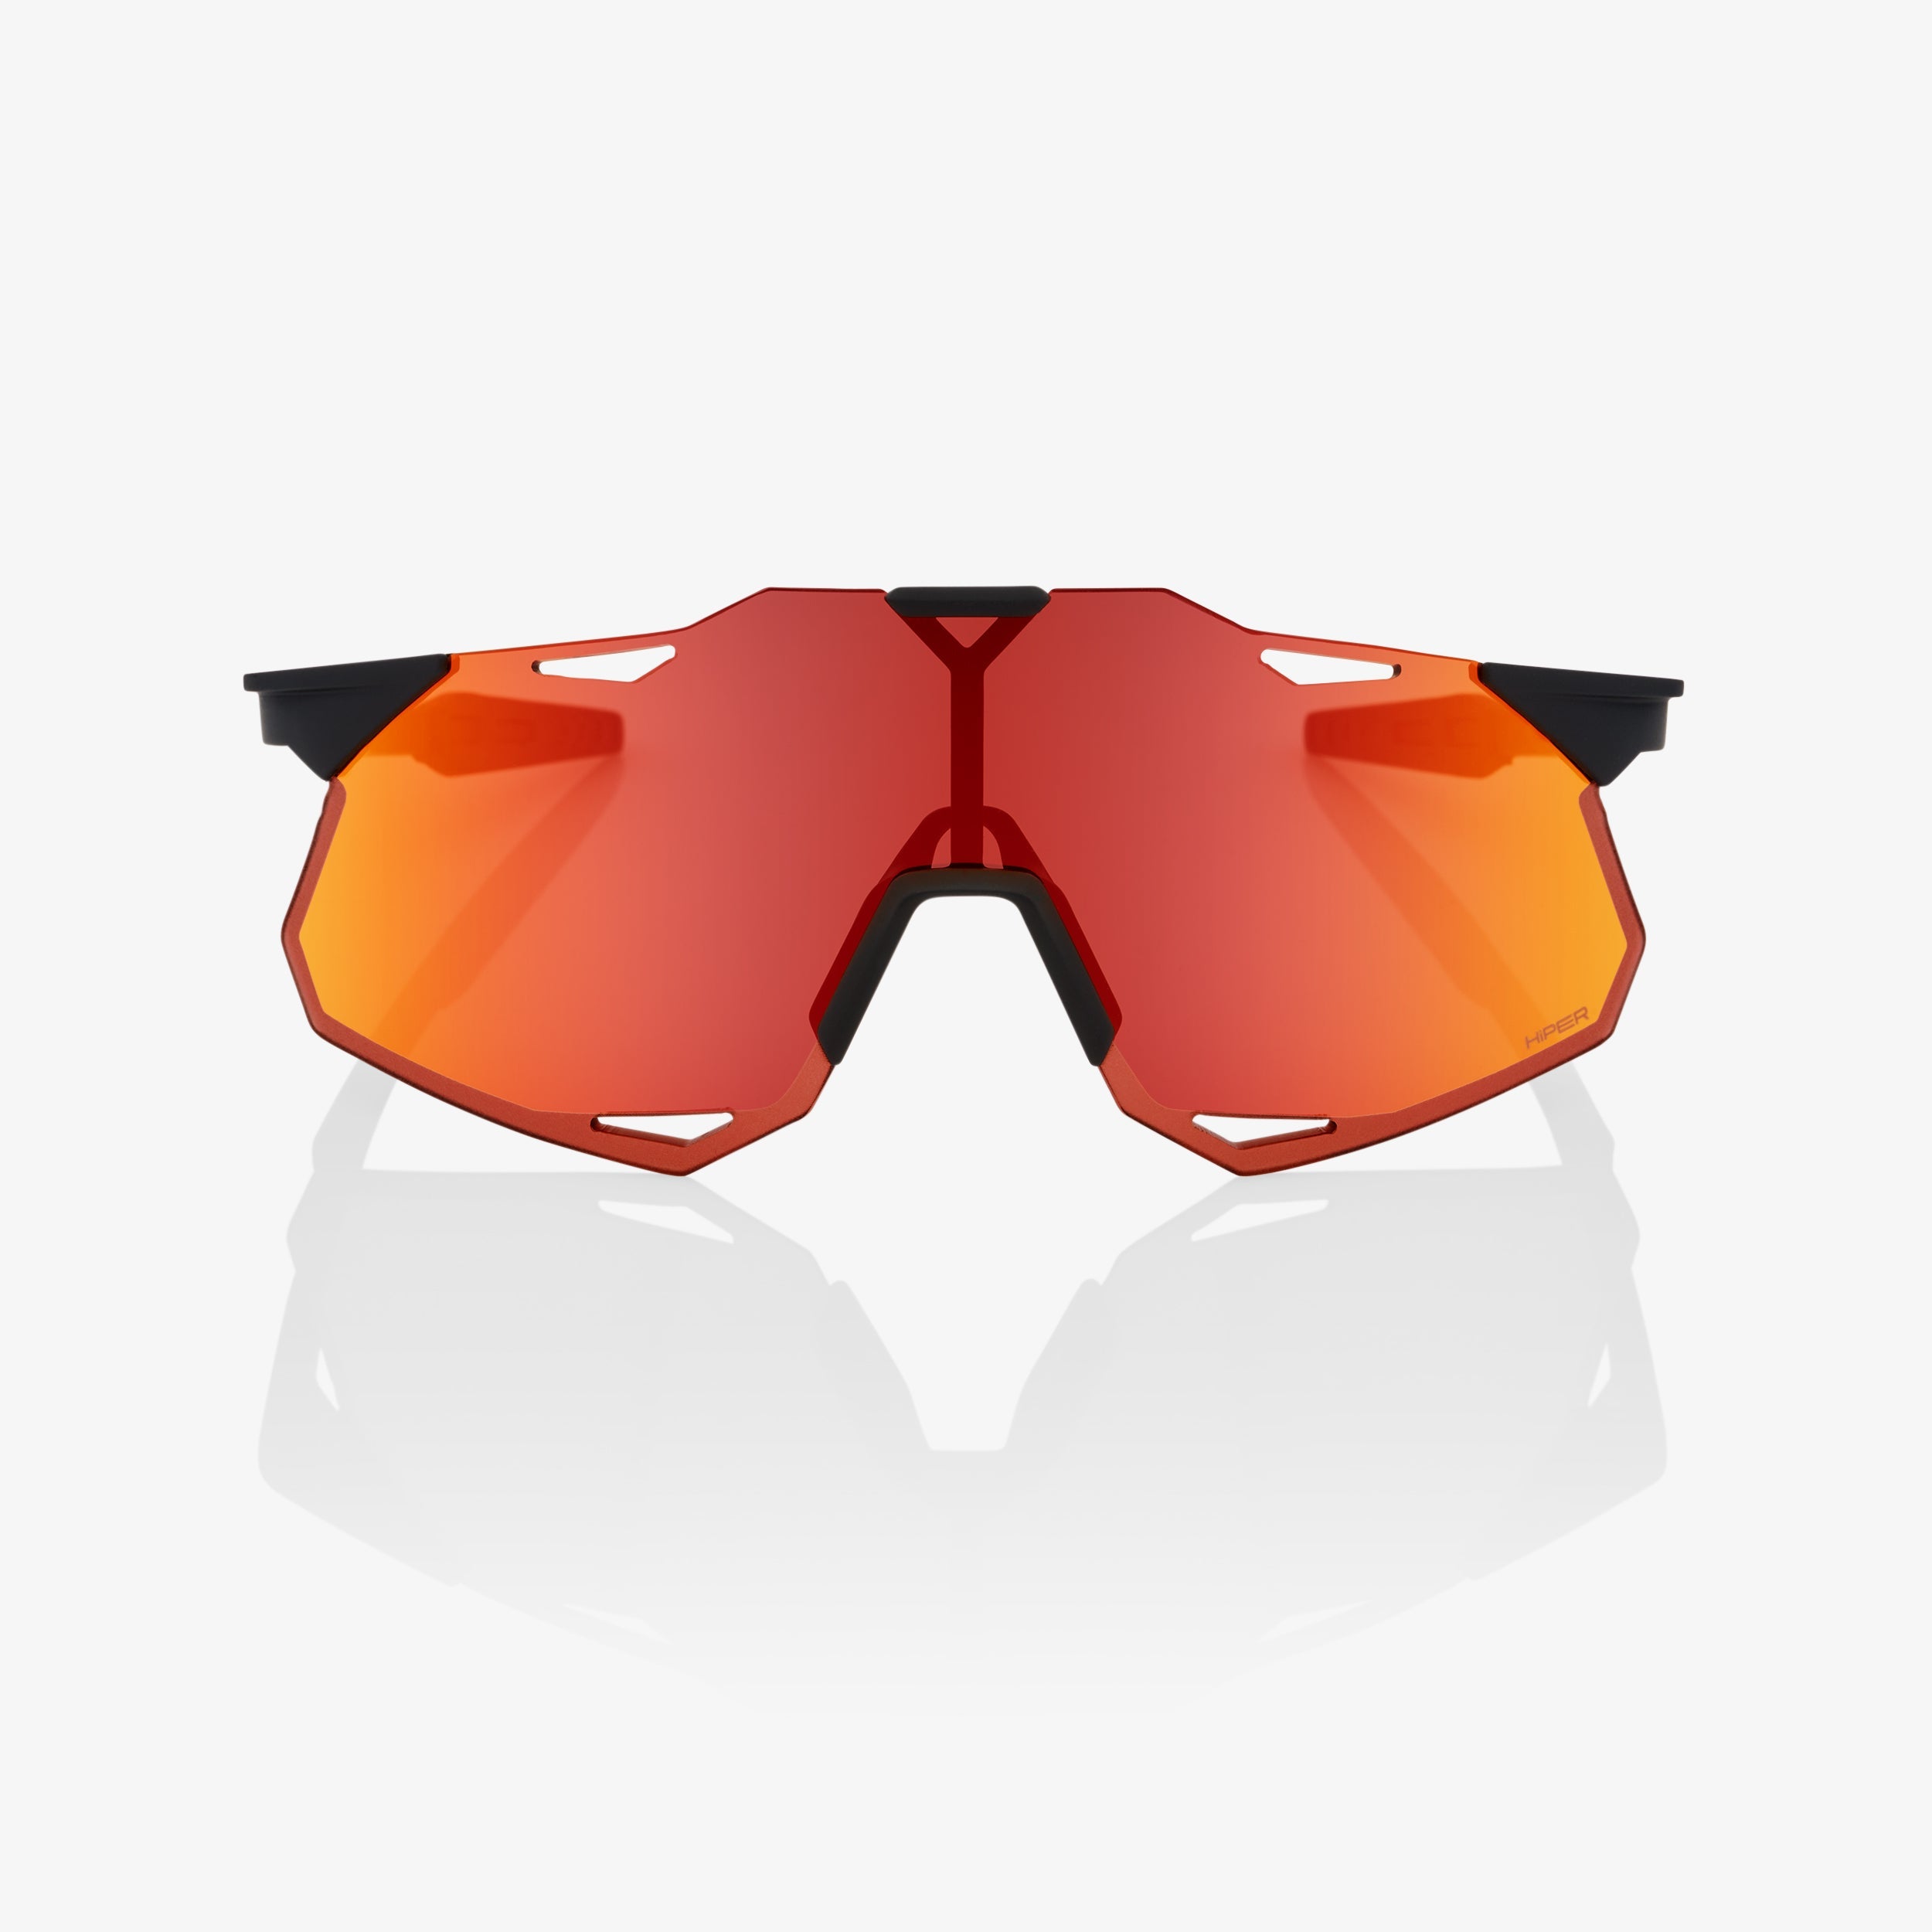 HYPERCRAFT XS - Soft Tact Black - HiPER Red Multilayer Mirror Lens - Secondary